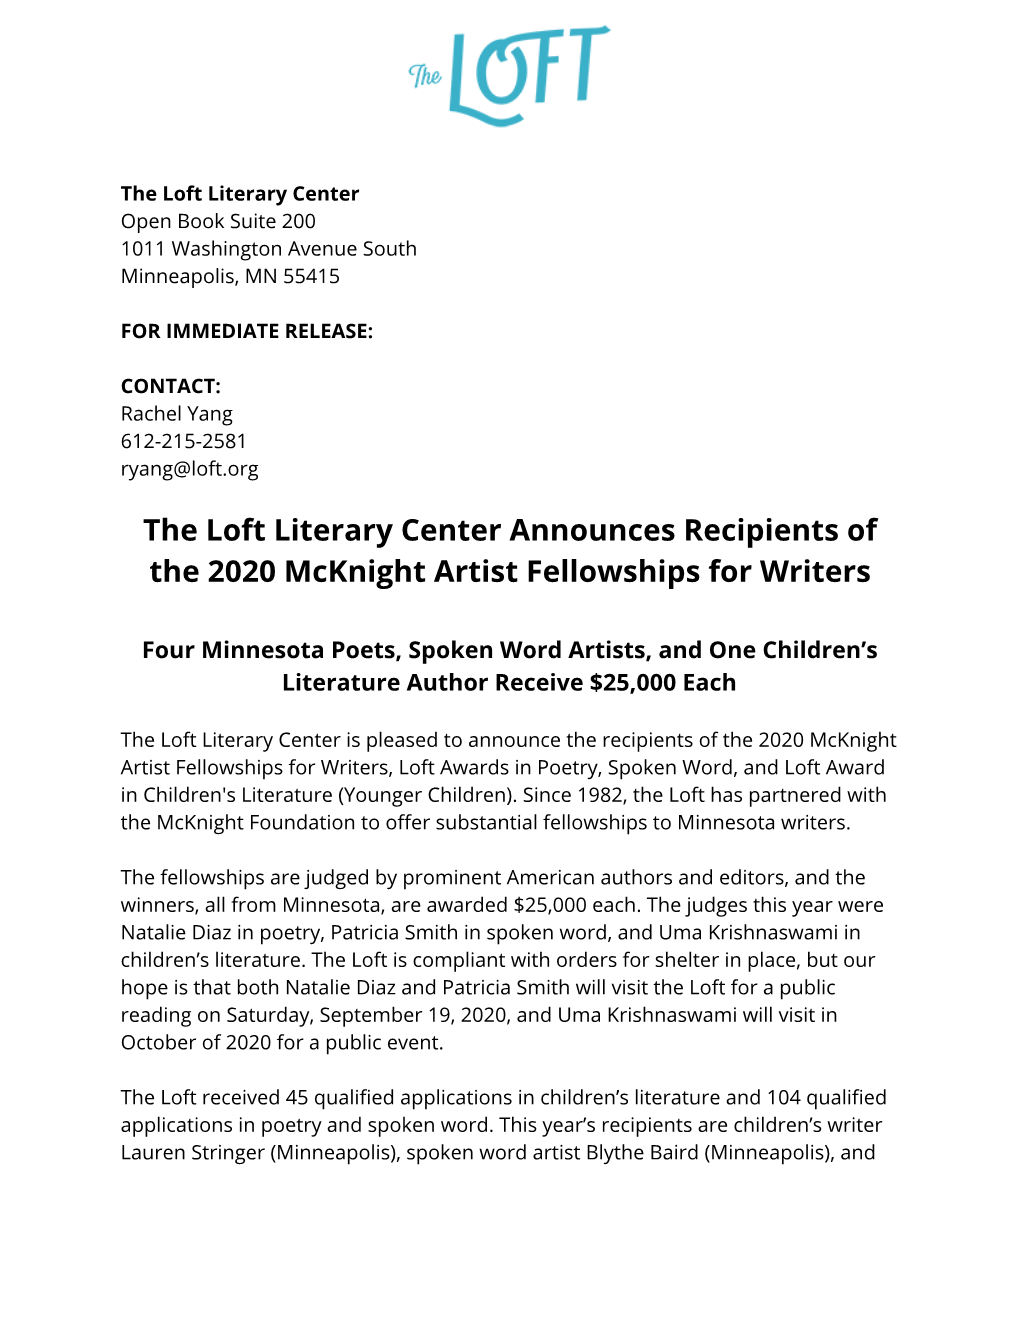 The Loft Literary Center Announces Recipients of the 2020 Mcknight Artist Fellowships for Writers